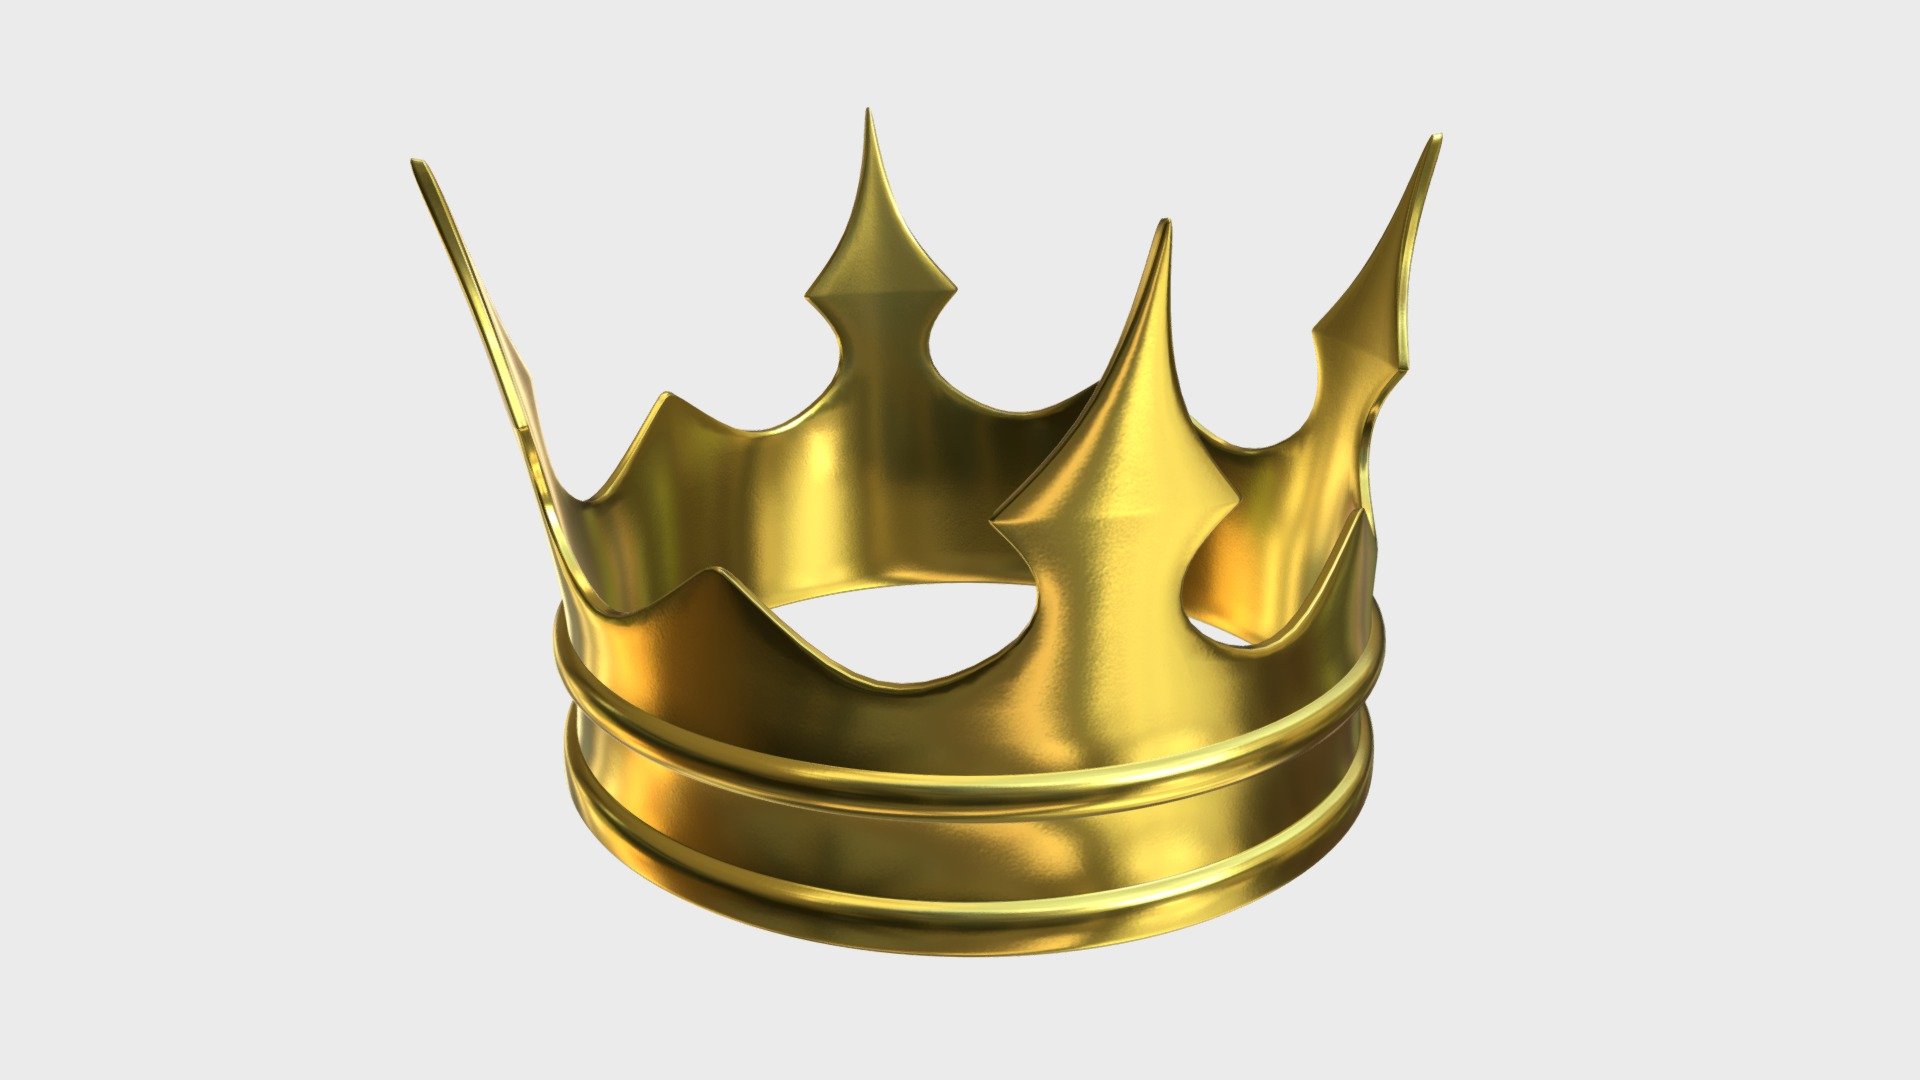 === The following description refers to the additional ZIP package provided with this model ===

Gold crown 3D Model, nr. 11 in my collection. Production-ready 3D Model, with PBR materials, textures, non overlapping UV Layout map provided in the package.

Quads only geometries (no tris/ngons).

Formats included: FBX, OBJ; scenes: BLEND (with Cycles / Eevee PBR Materials and Textures); other: png with Alpha.

1 Object (mesh), 1 PBR Material, UV unwrapped (non overlapping UV Layout map provided in the package); UV-mapped Textures.

UV Layout maps and Image Textures resolutions: 2048x2048; PBR Textures made with Substance Painter.

Polygonal, QUADS ONLY (no tris/ngons); 12880 vertices, 12880 quad faces (25760 tris).

Real world dimensions; scene scale units: cm in Blender 3.1 (that is: Metric with 0.01 scale).

Uniform scale object (scale applied in Blender 3.1) 3d model